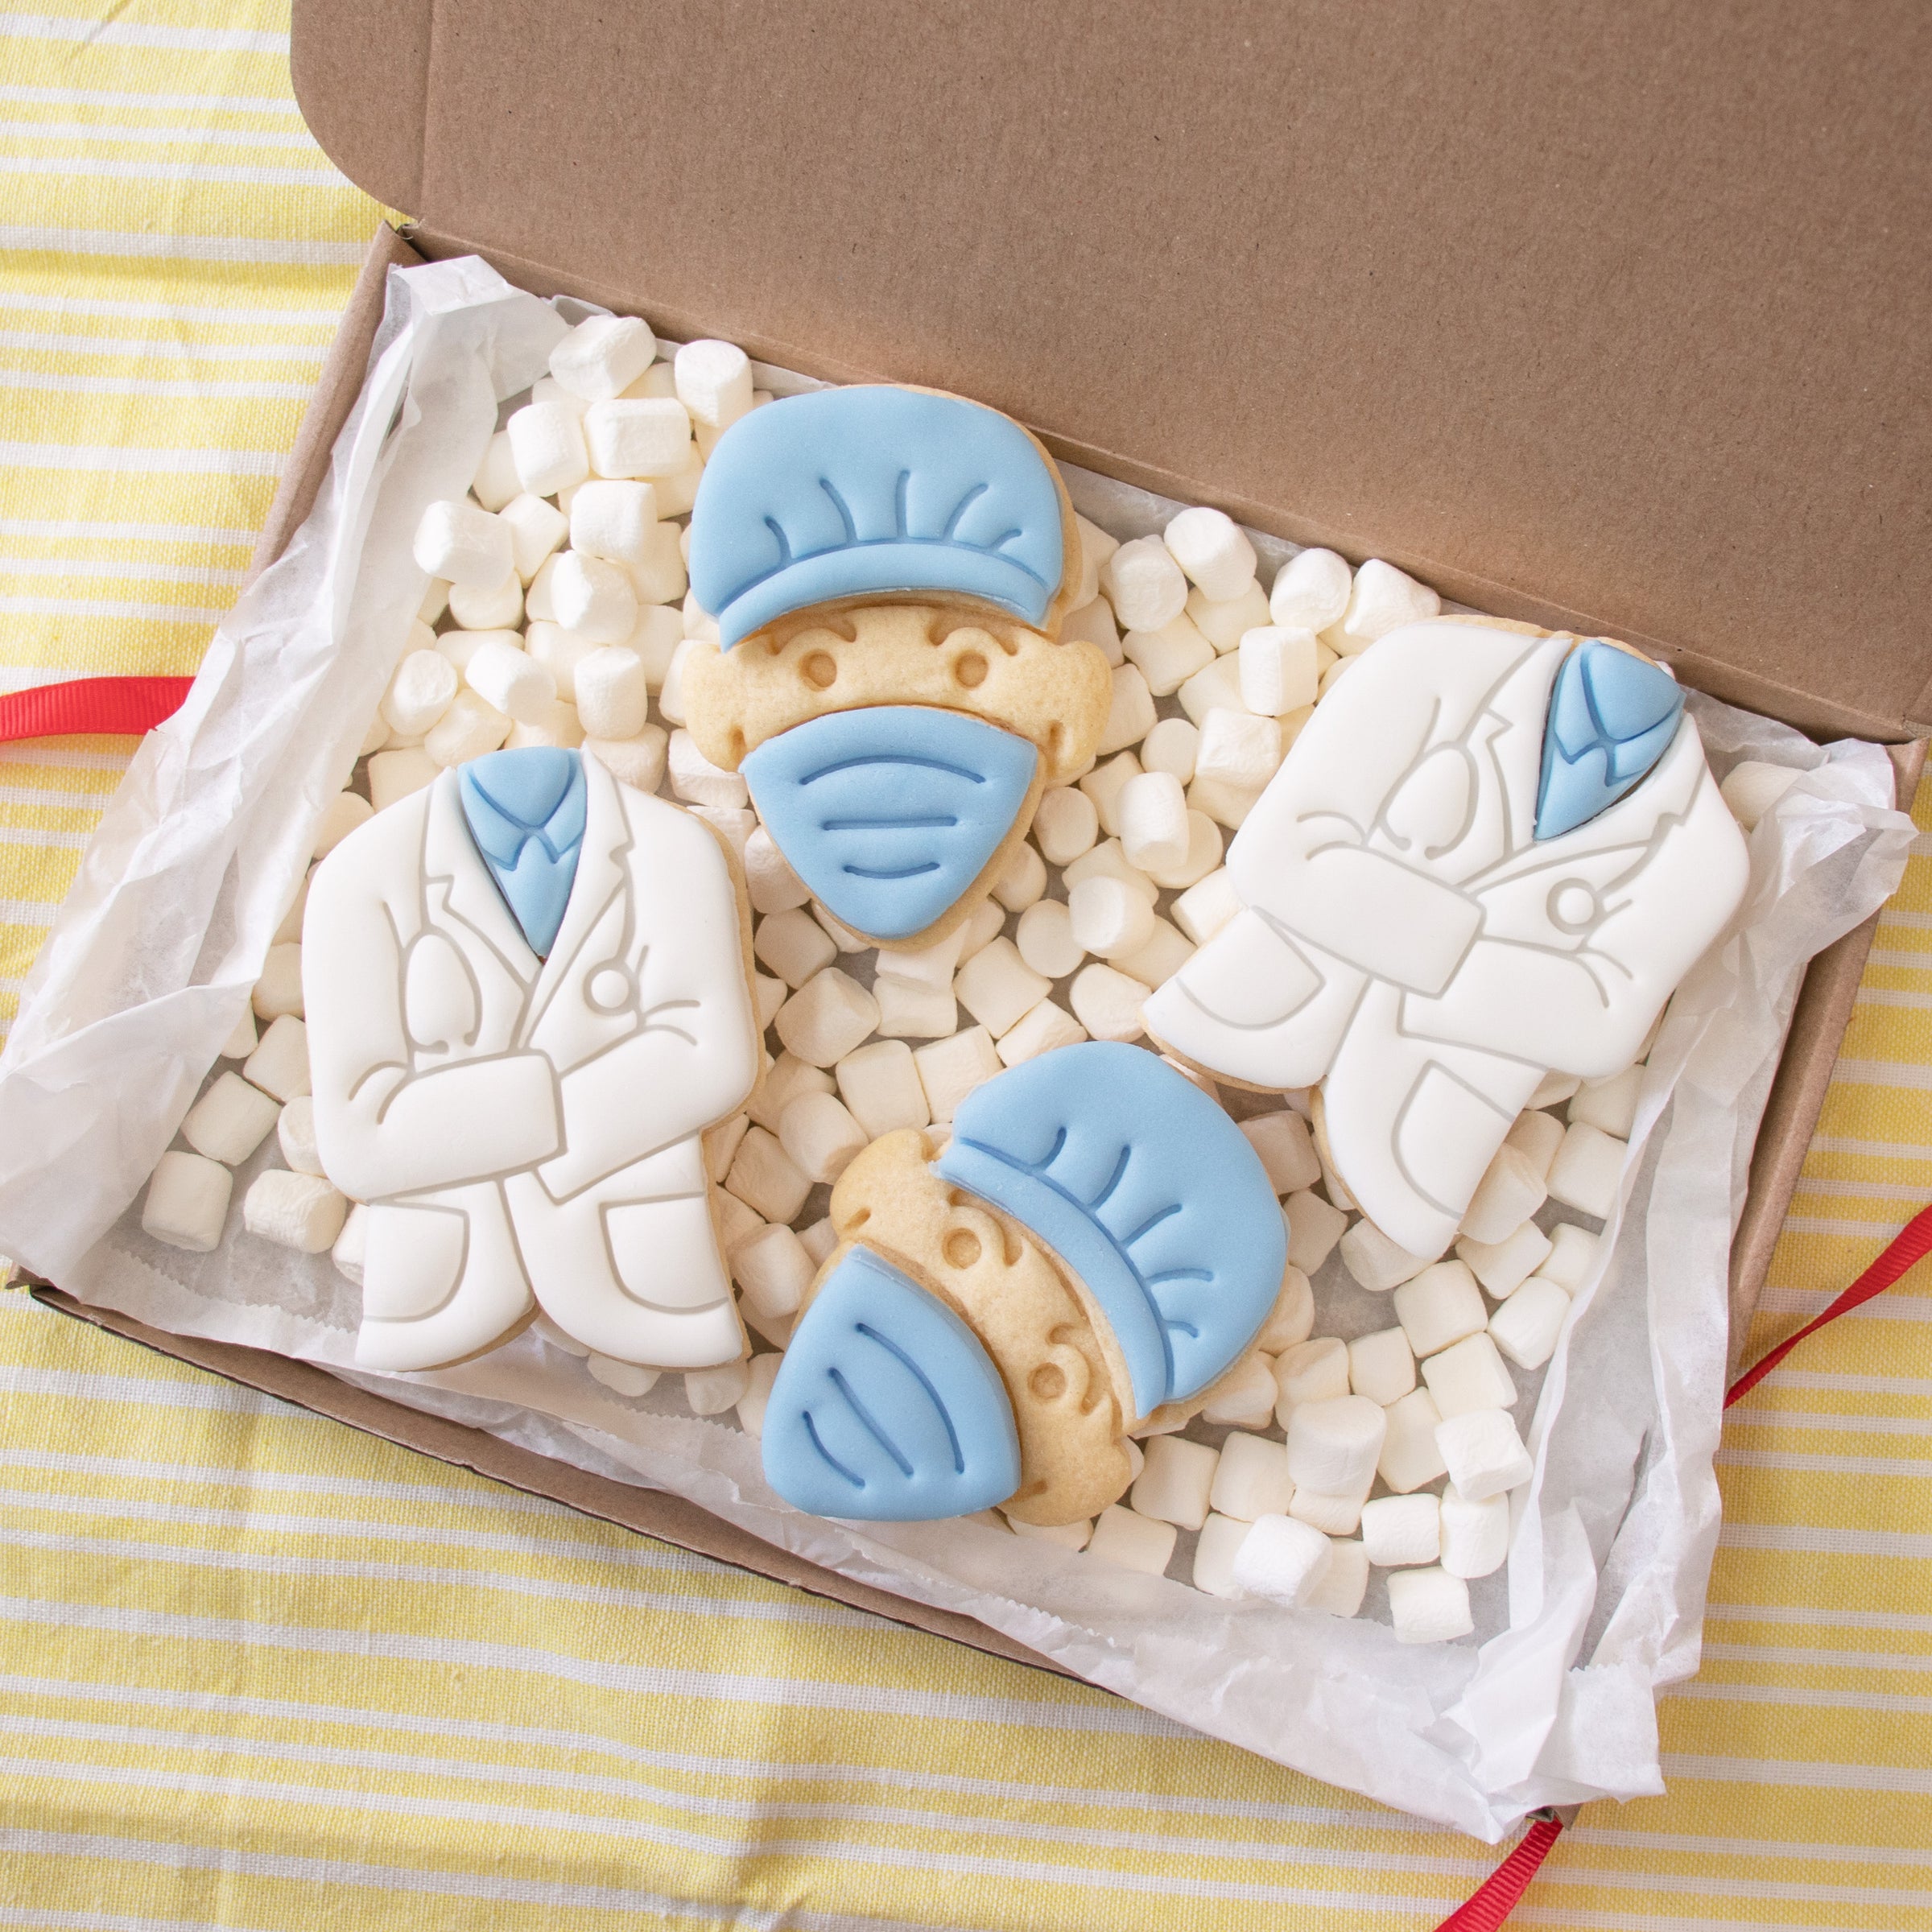 doctor themed cookies, includes leg cast, surgeon face with mask and doctor's coat.